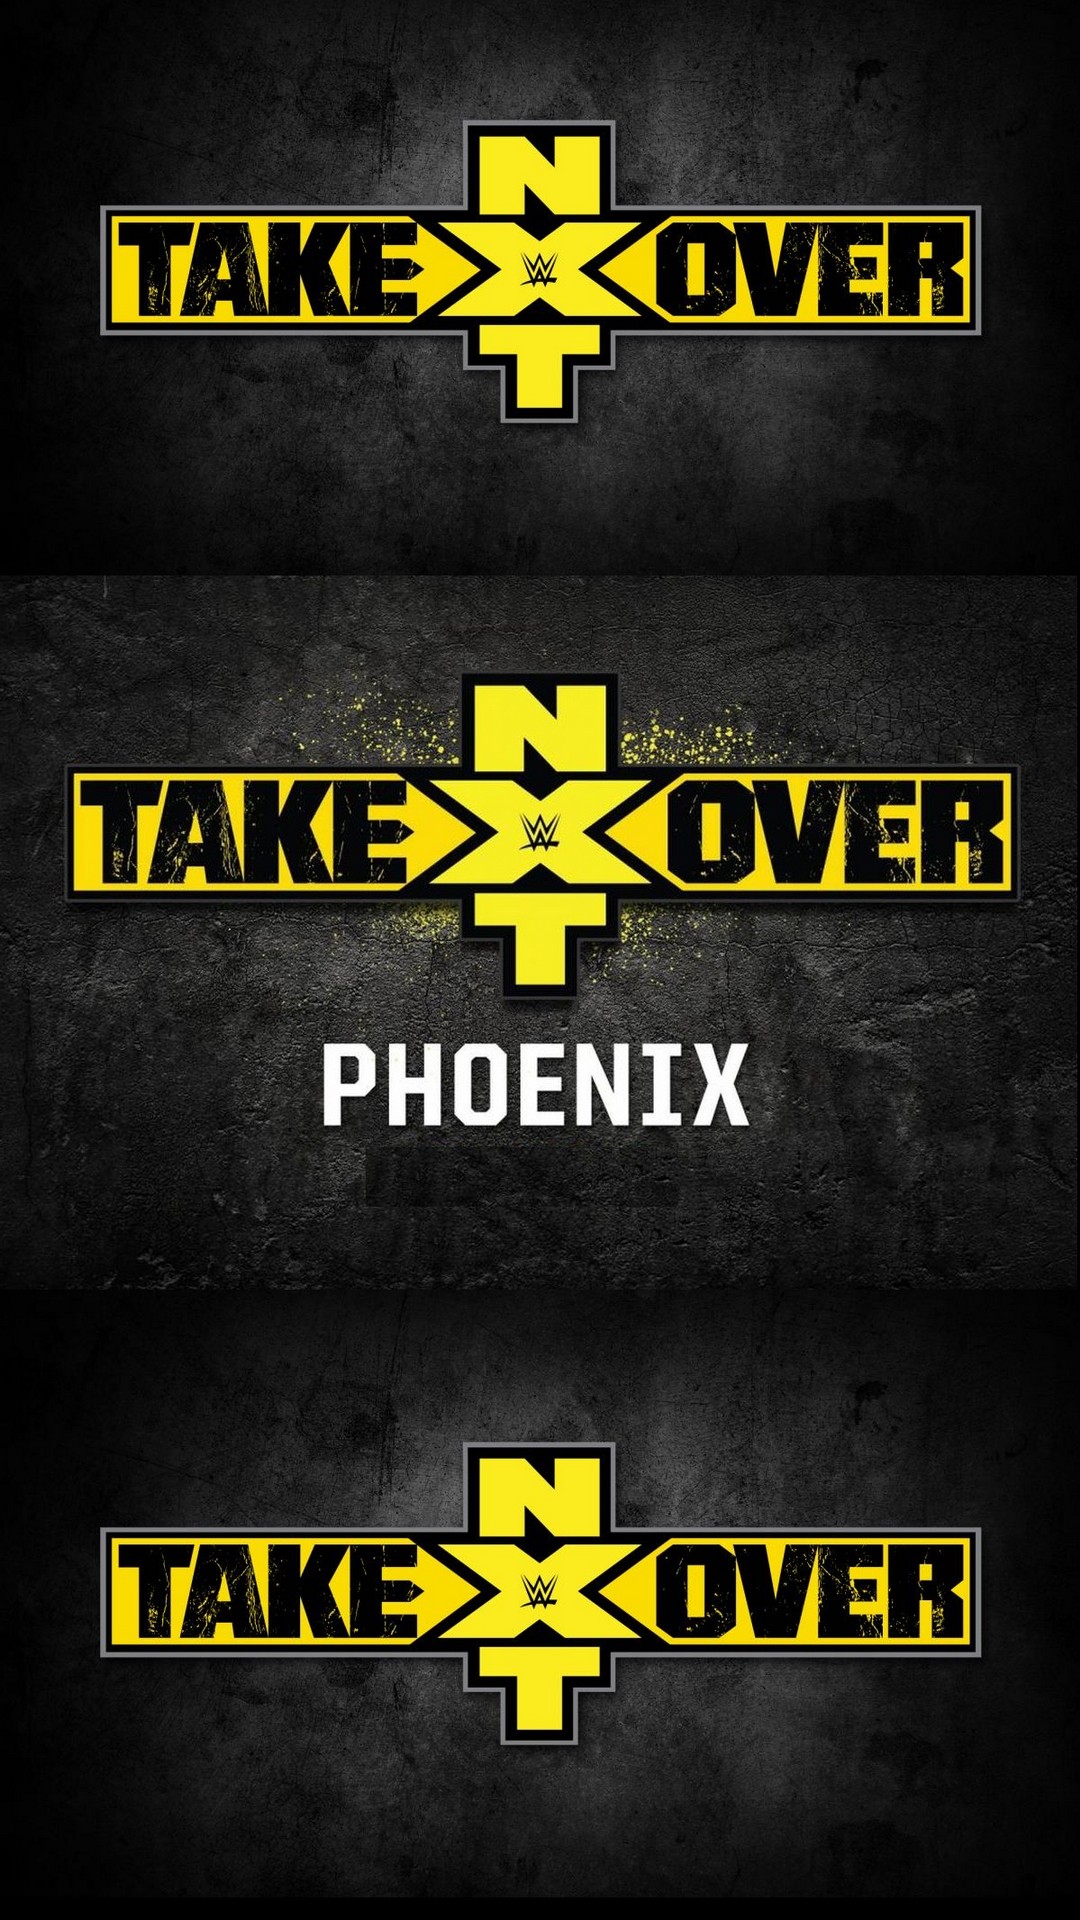 iPhone Wallpaper NXT Takeover With high-resolution 1080X1920 pixel. You can use this wallpaper for your iPhone 5, 6, 7, 8, X, XS, XR backgrounds, Mobile Screensaver, or iPad Lock Screen